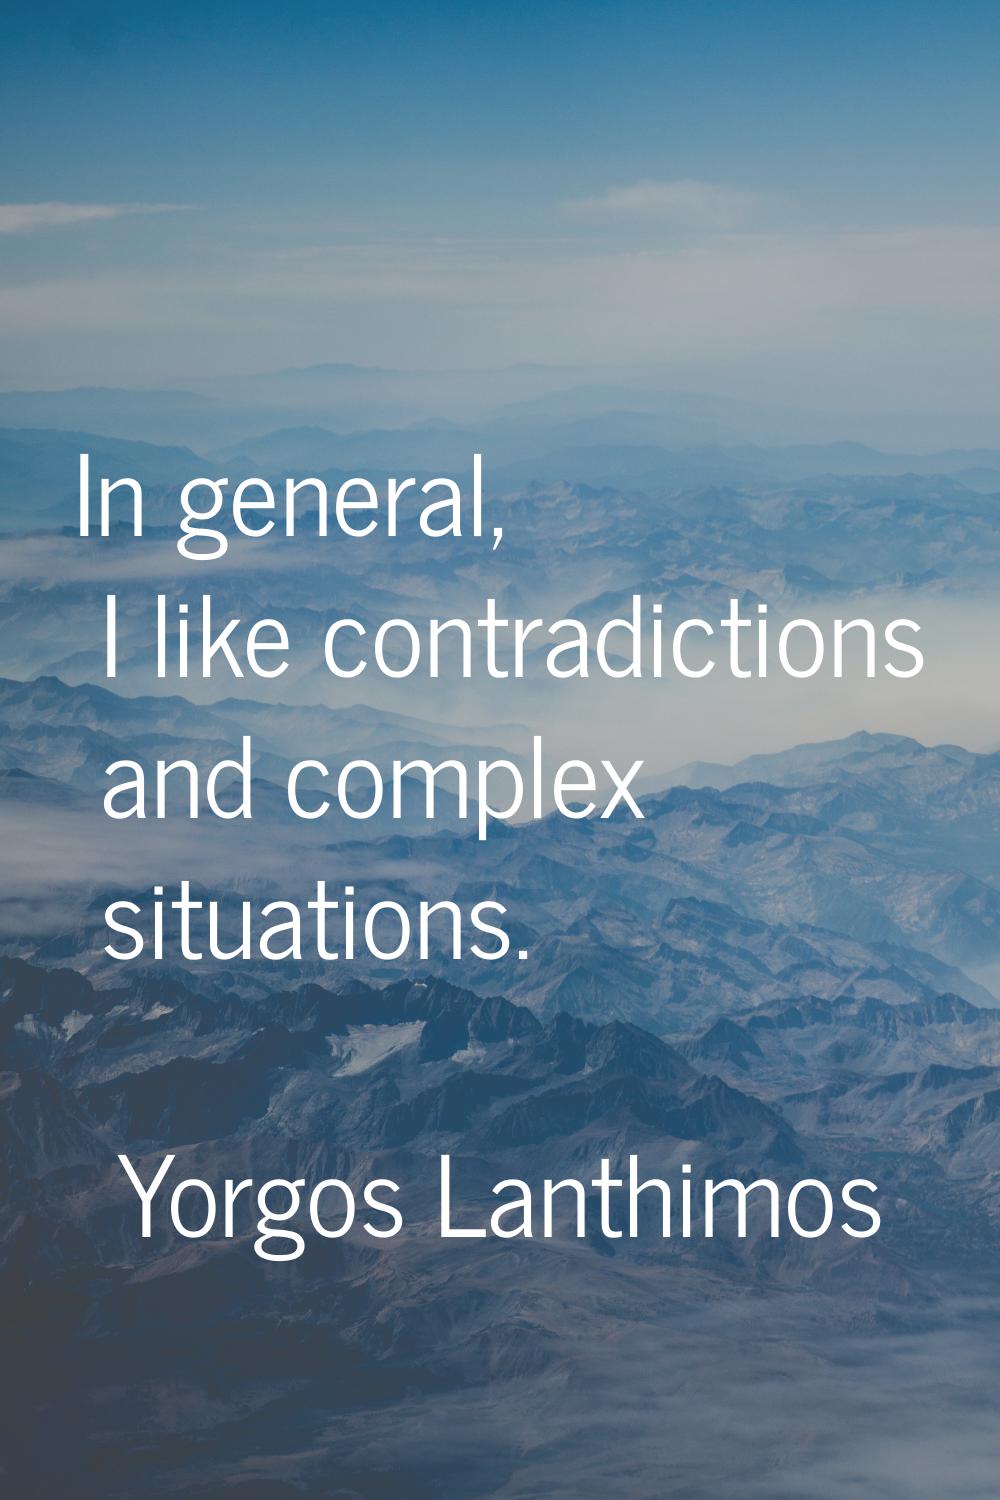 In general, I like contradictions and complex situations.